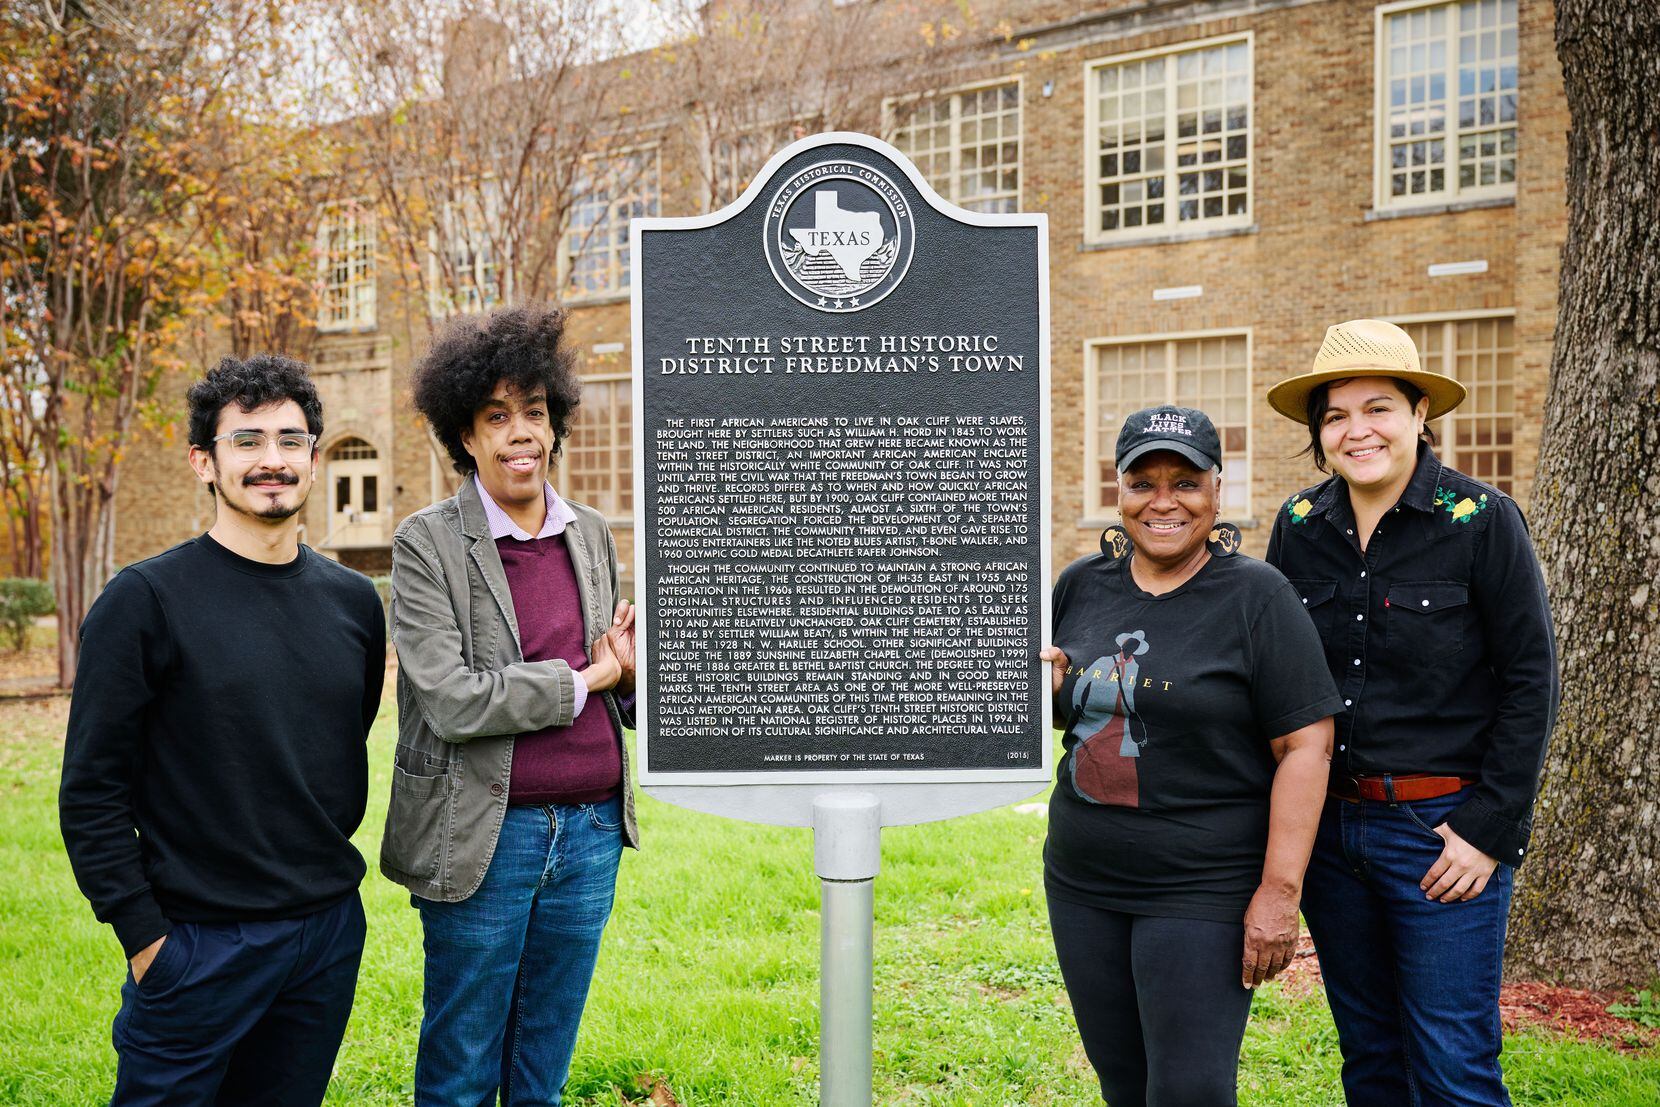 Standing alongside the historical marker for the Tenth Street Historic District freedman's...